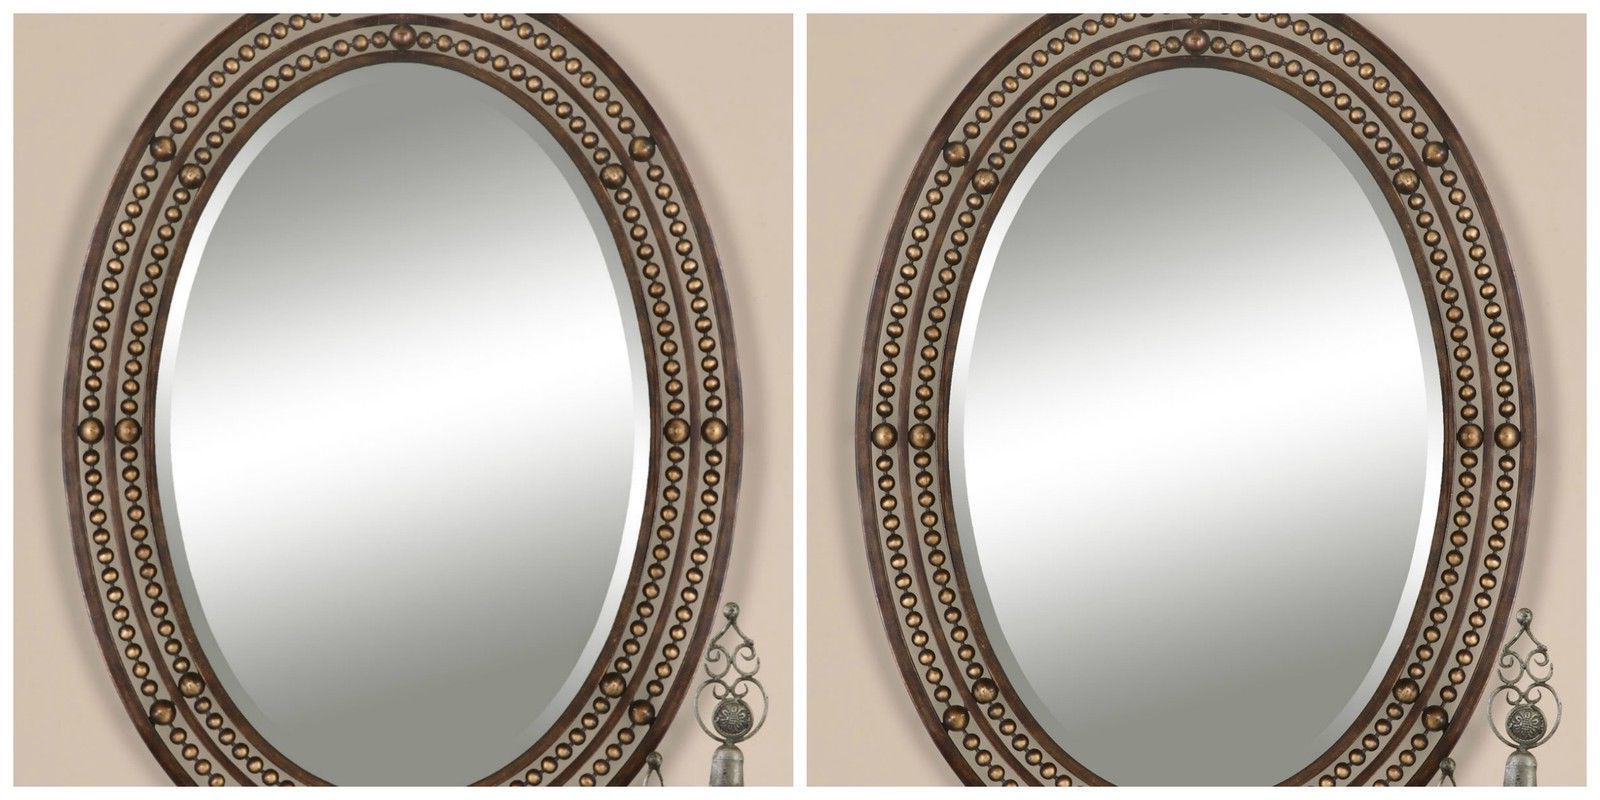 2 Mid Century Inspired Oil Rubbed Bronze Metal Oval Beveled Wall Vanity Intended For Well Known Woven Bronze Metal Wall Mirrors (View 4 of 15)